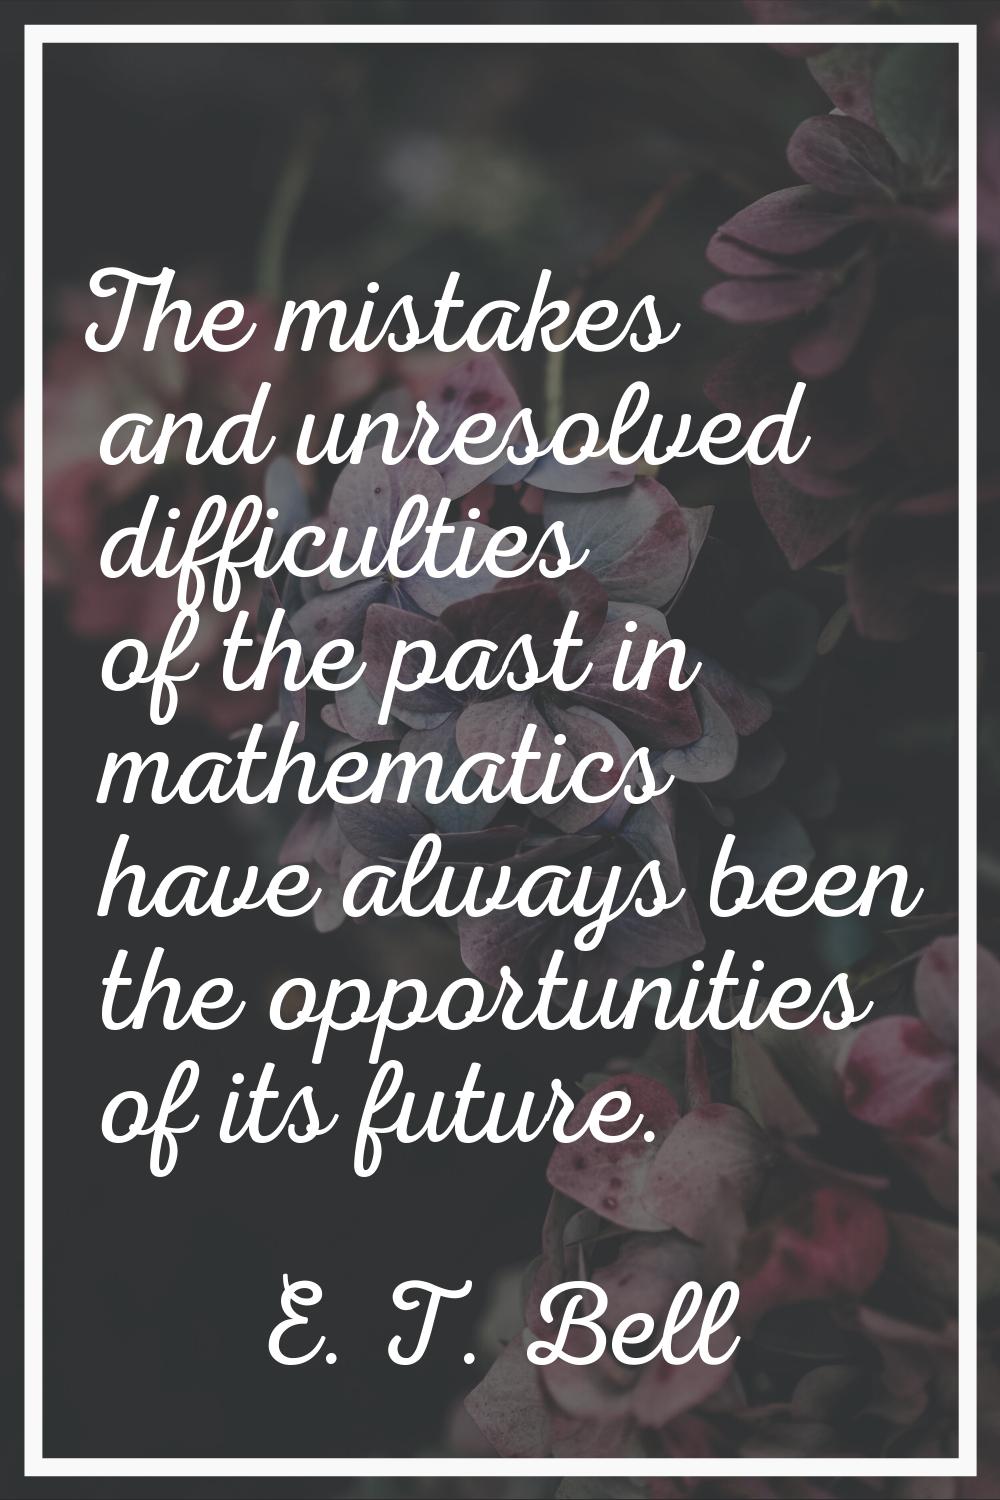 The mistakes and unresolved difficulties of the past in mathematics have always been the opportunit